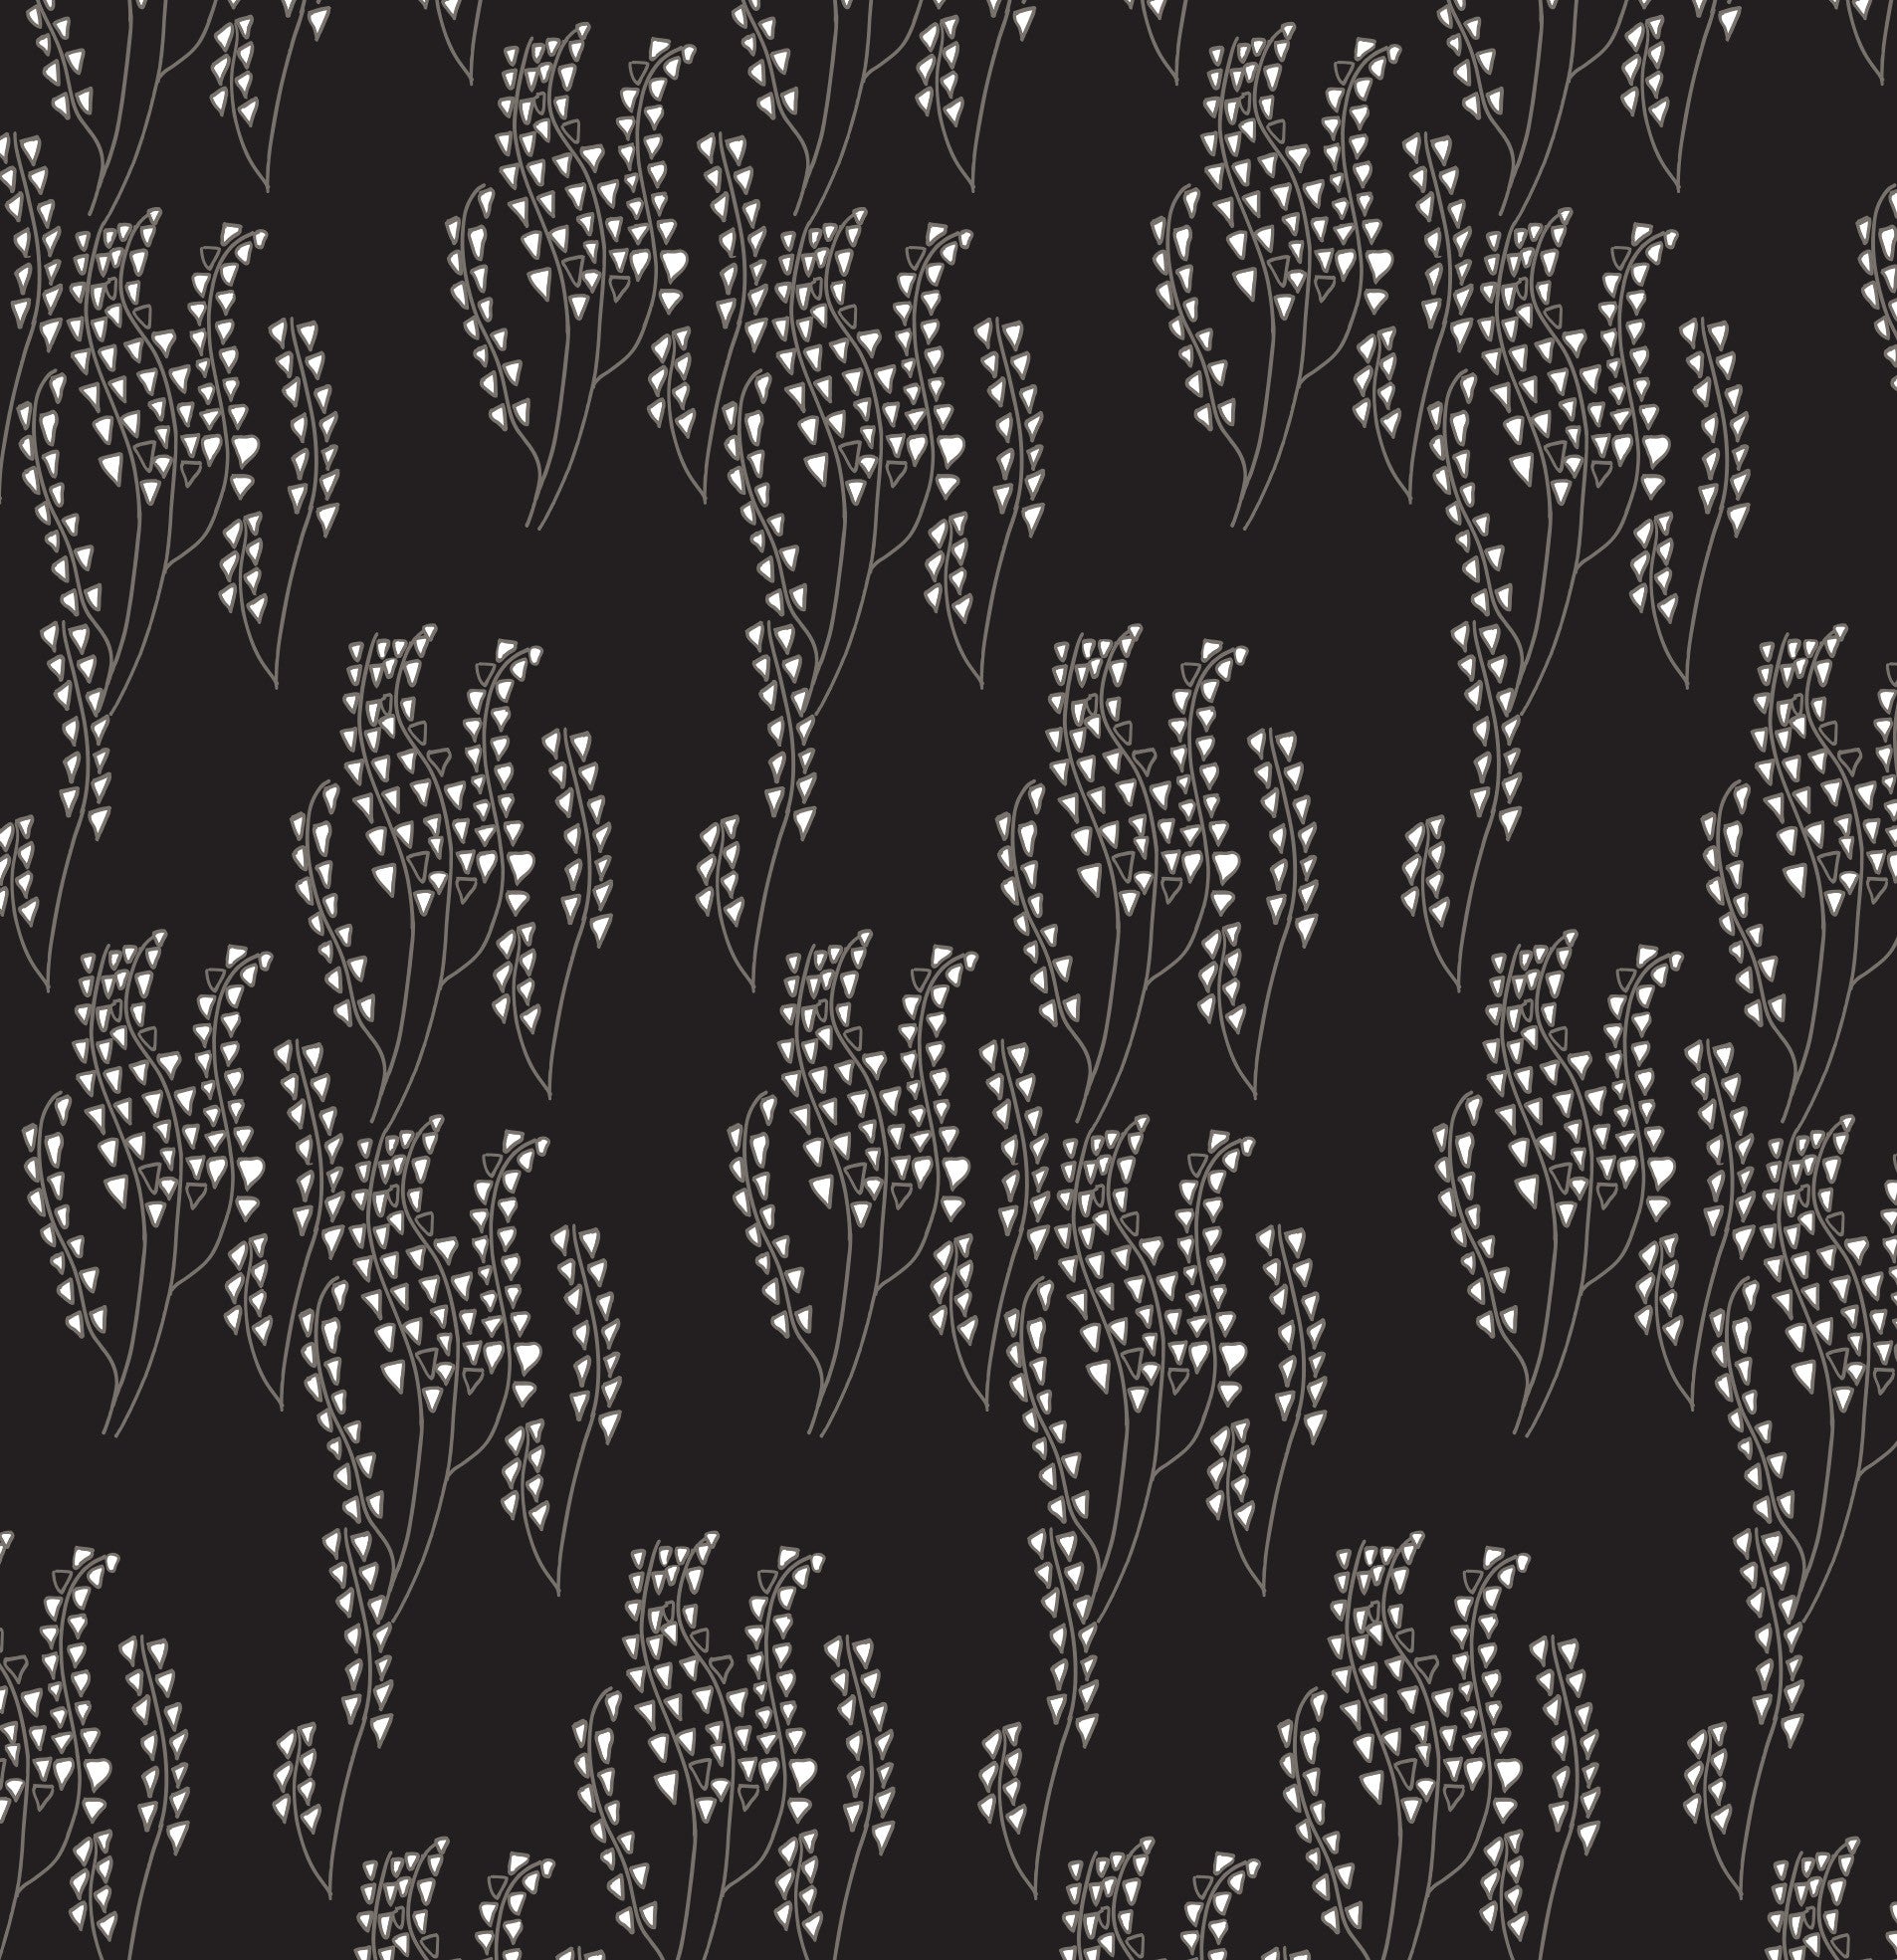 Maricopa Floral Pattern Linen Cotton Home Decor Fabric by yard or by the meter for curtains, blinds or upholstery - Black with grey ships from Canada (USA)